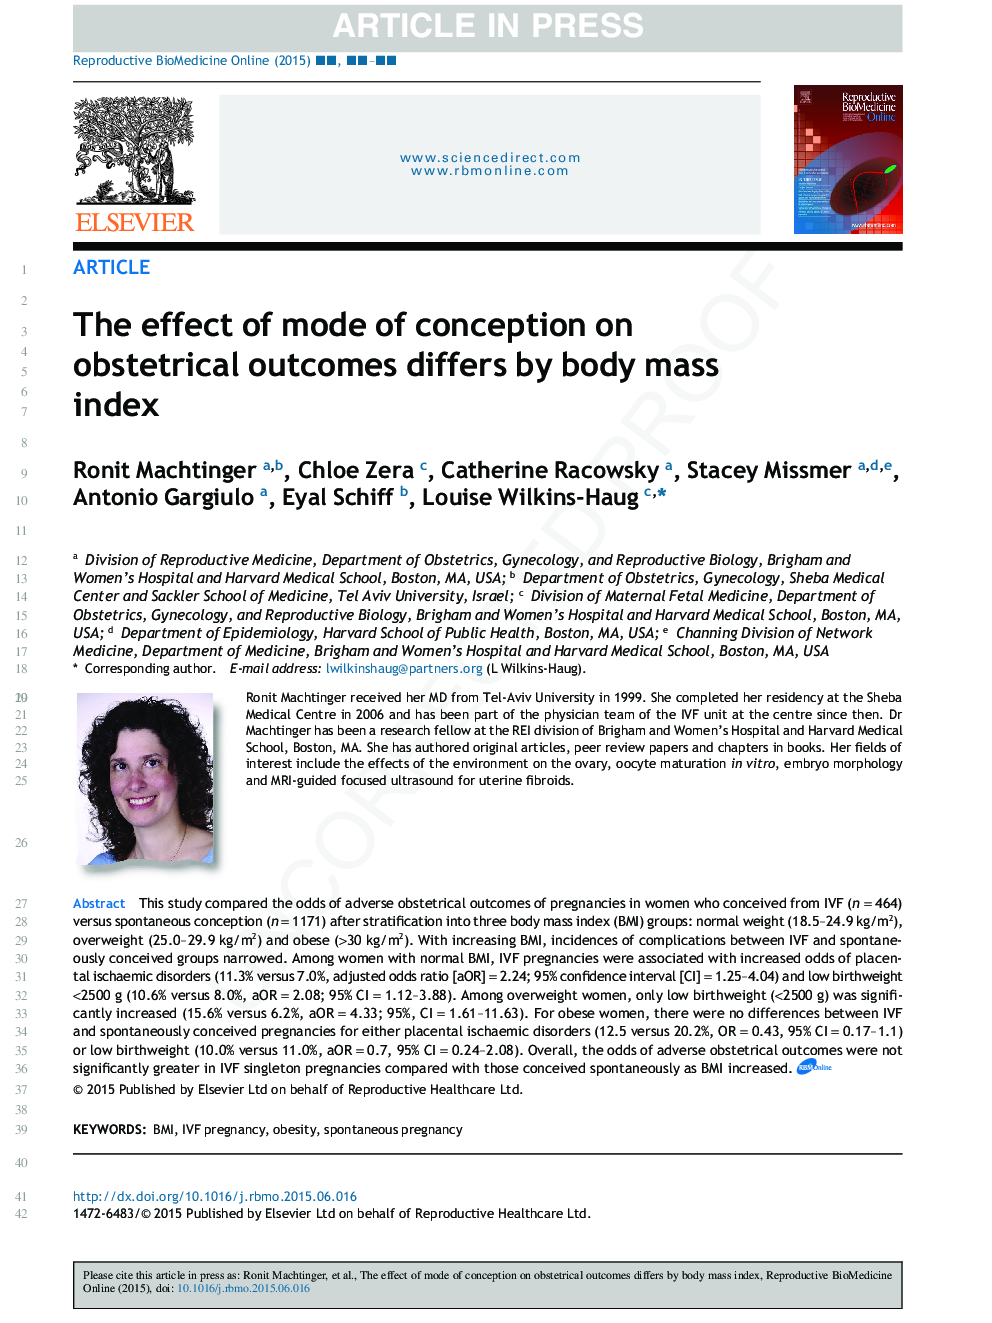 The effect of mode of conception on obstetrical outcomes differs by body mass index